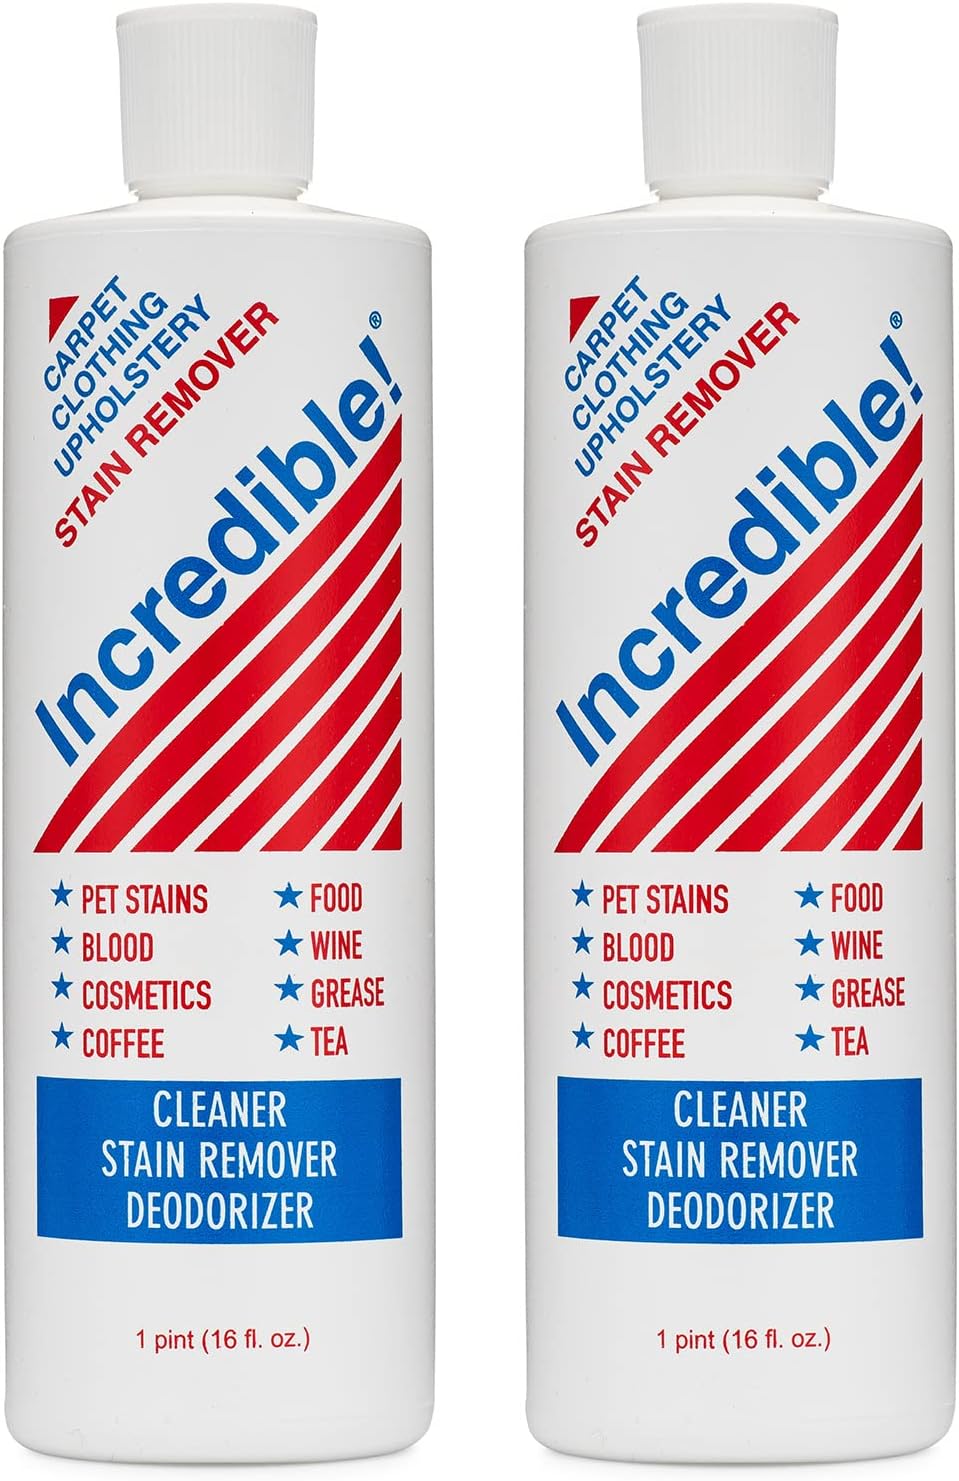 Incredible! Stain Remover - Spot Cleaner for Clothes, [...]